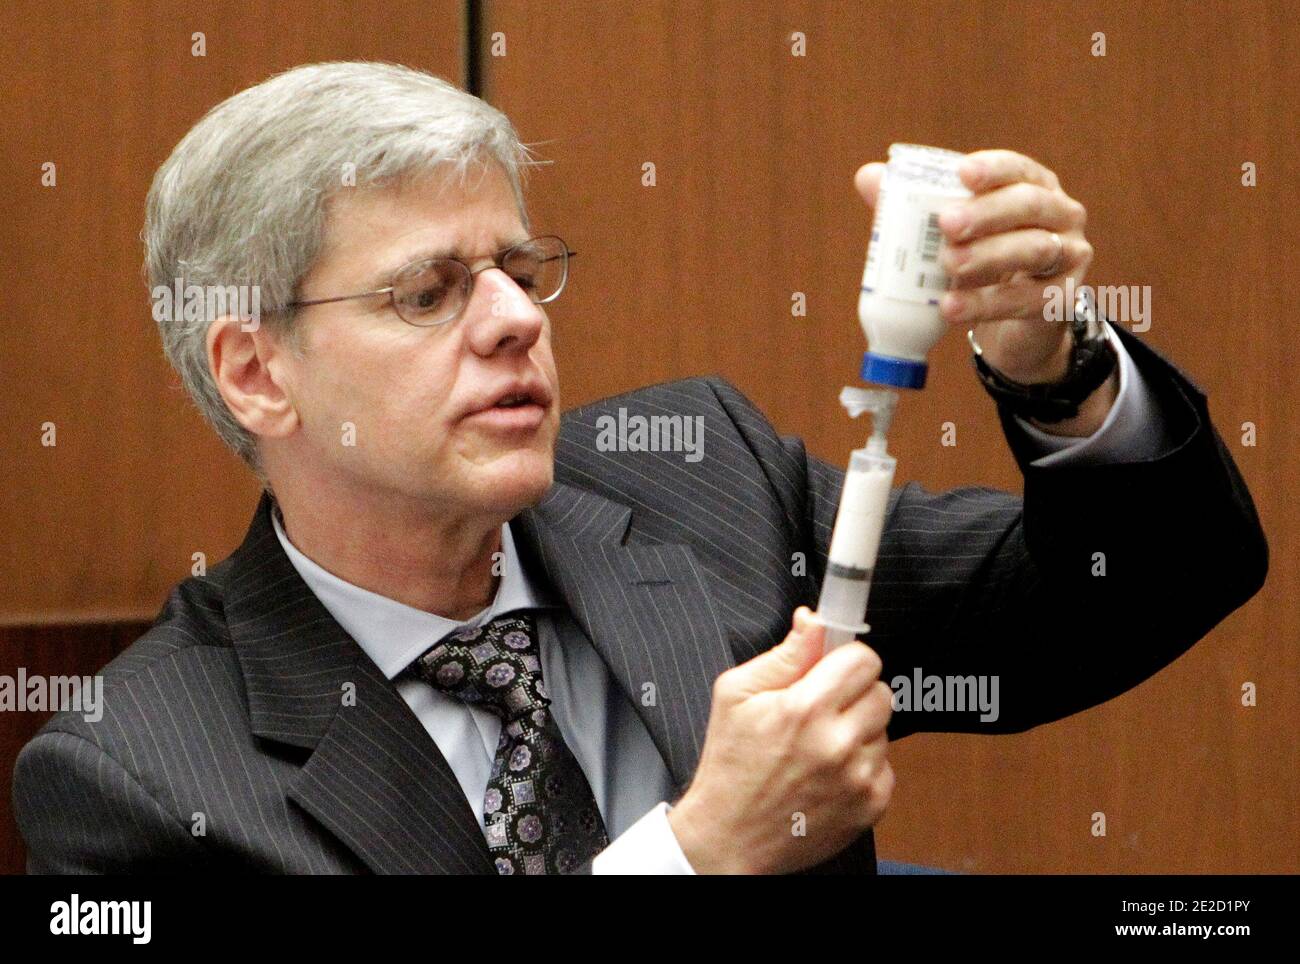 Anesthesiology expert Dr. Steven Shafer demonstrates how Propofol is extracted out of a glass bottle with a syringe during Dr. Conrad Murray's involuntary manslaughter trial in downtown Los Angeles on October 19, 2011. Murray has pleaded not guilty and faces four years in prison and the loss of his medical license if convicted of involuntary manslaughter in Michael Jackson's death. Photo by Reed Saxon/Pool/ABACAPRESS.COM Stock Photo